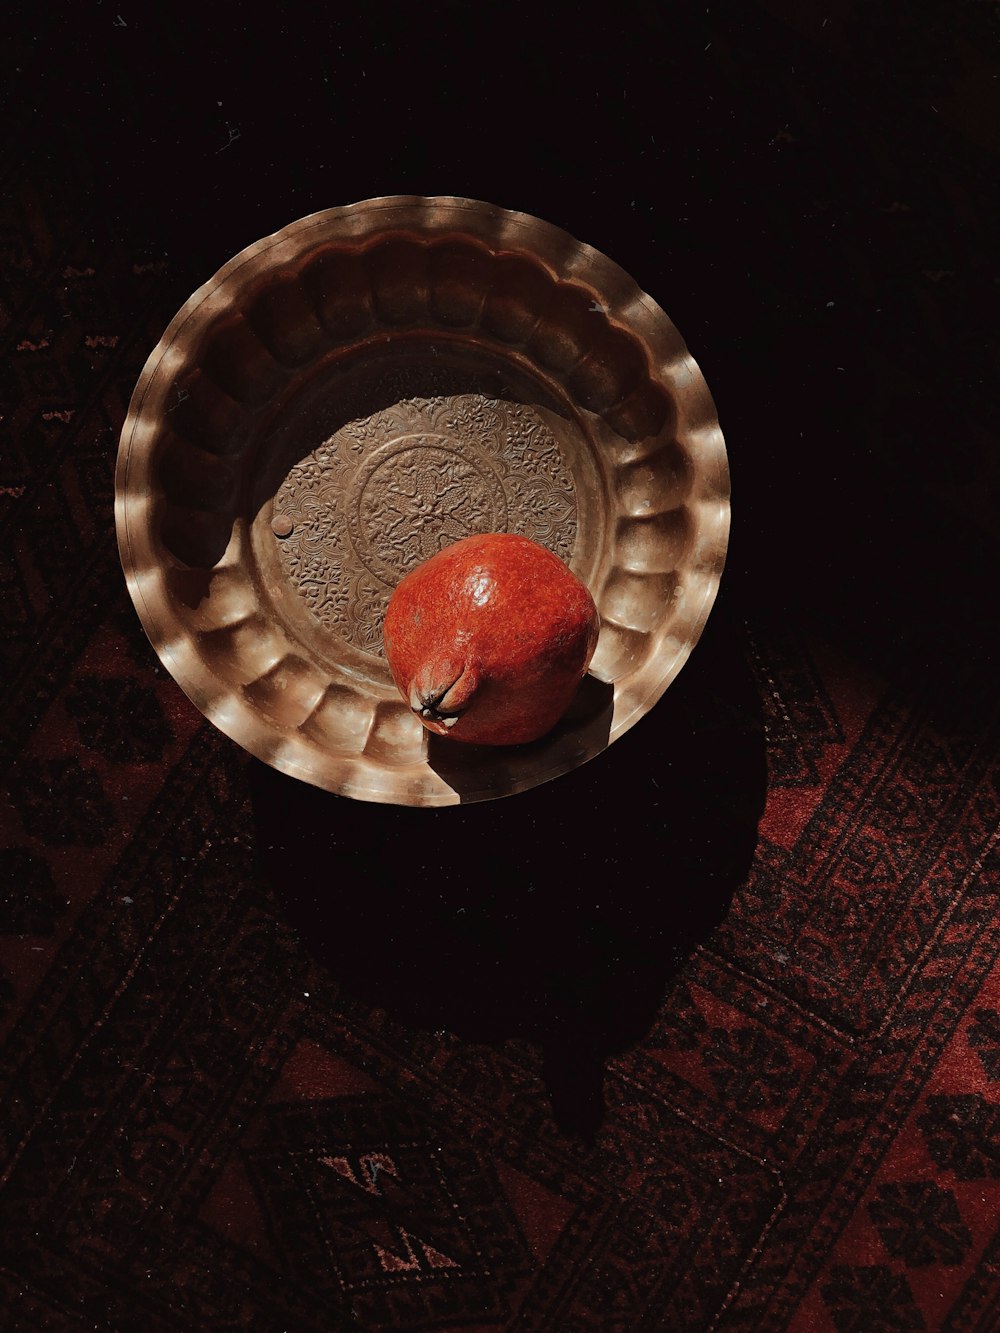 a red apple sitting in a bowl on a table